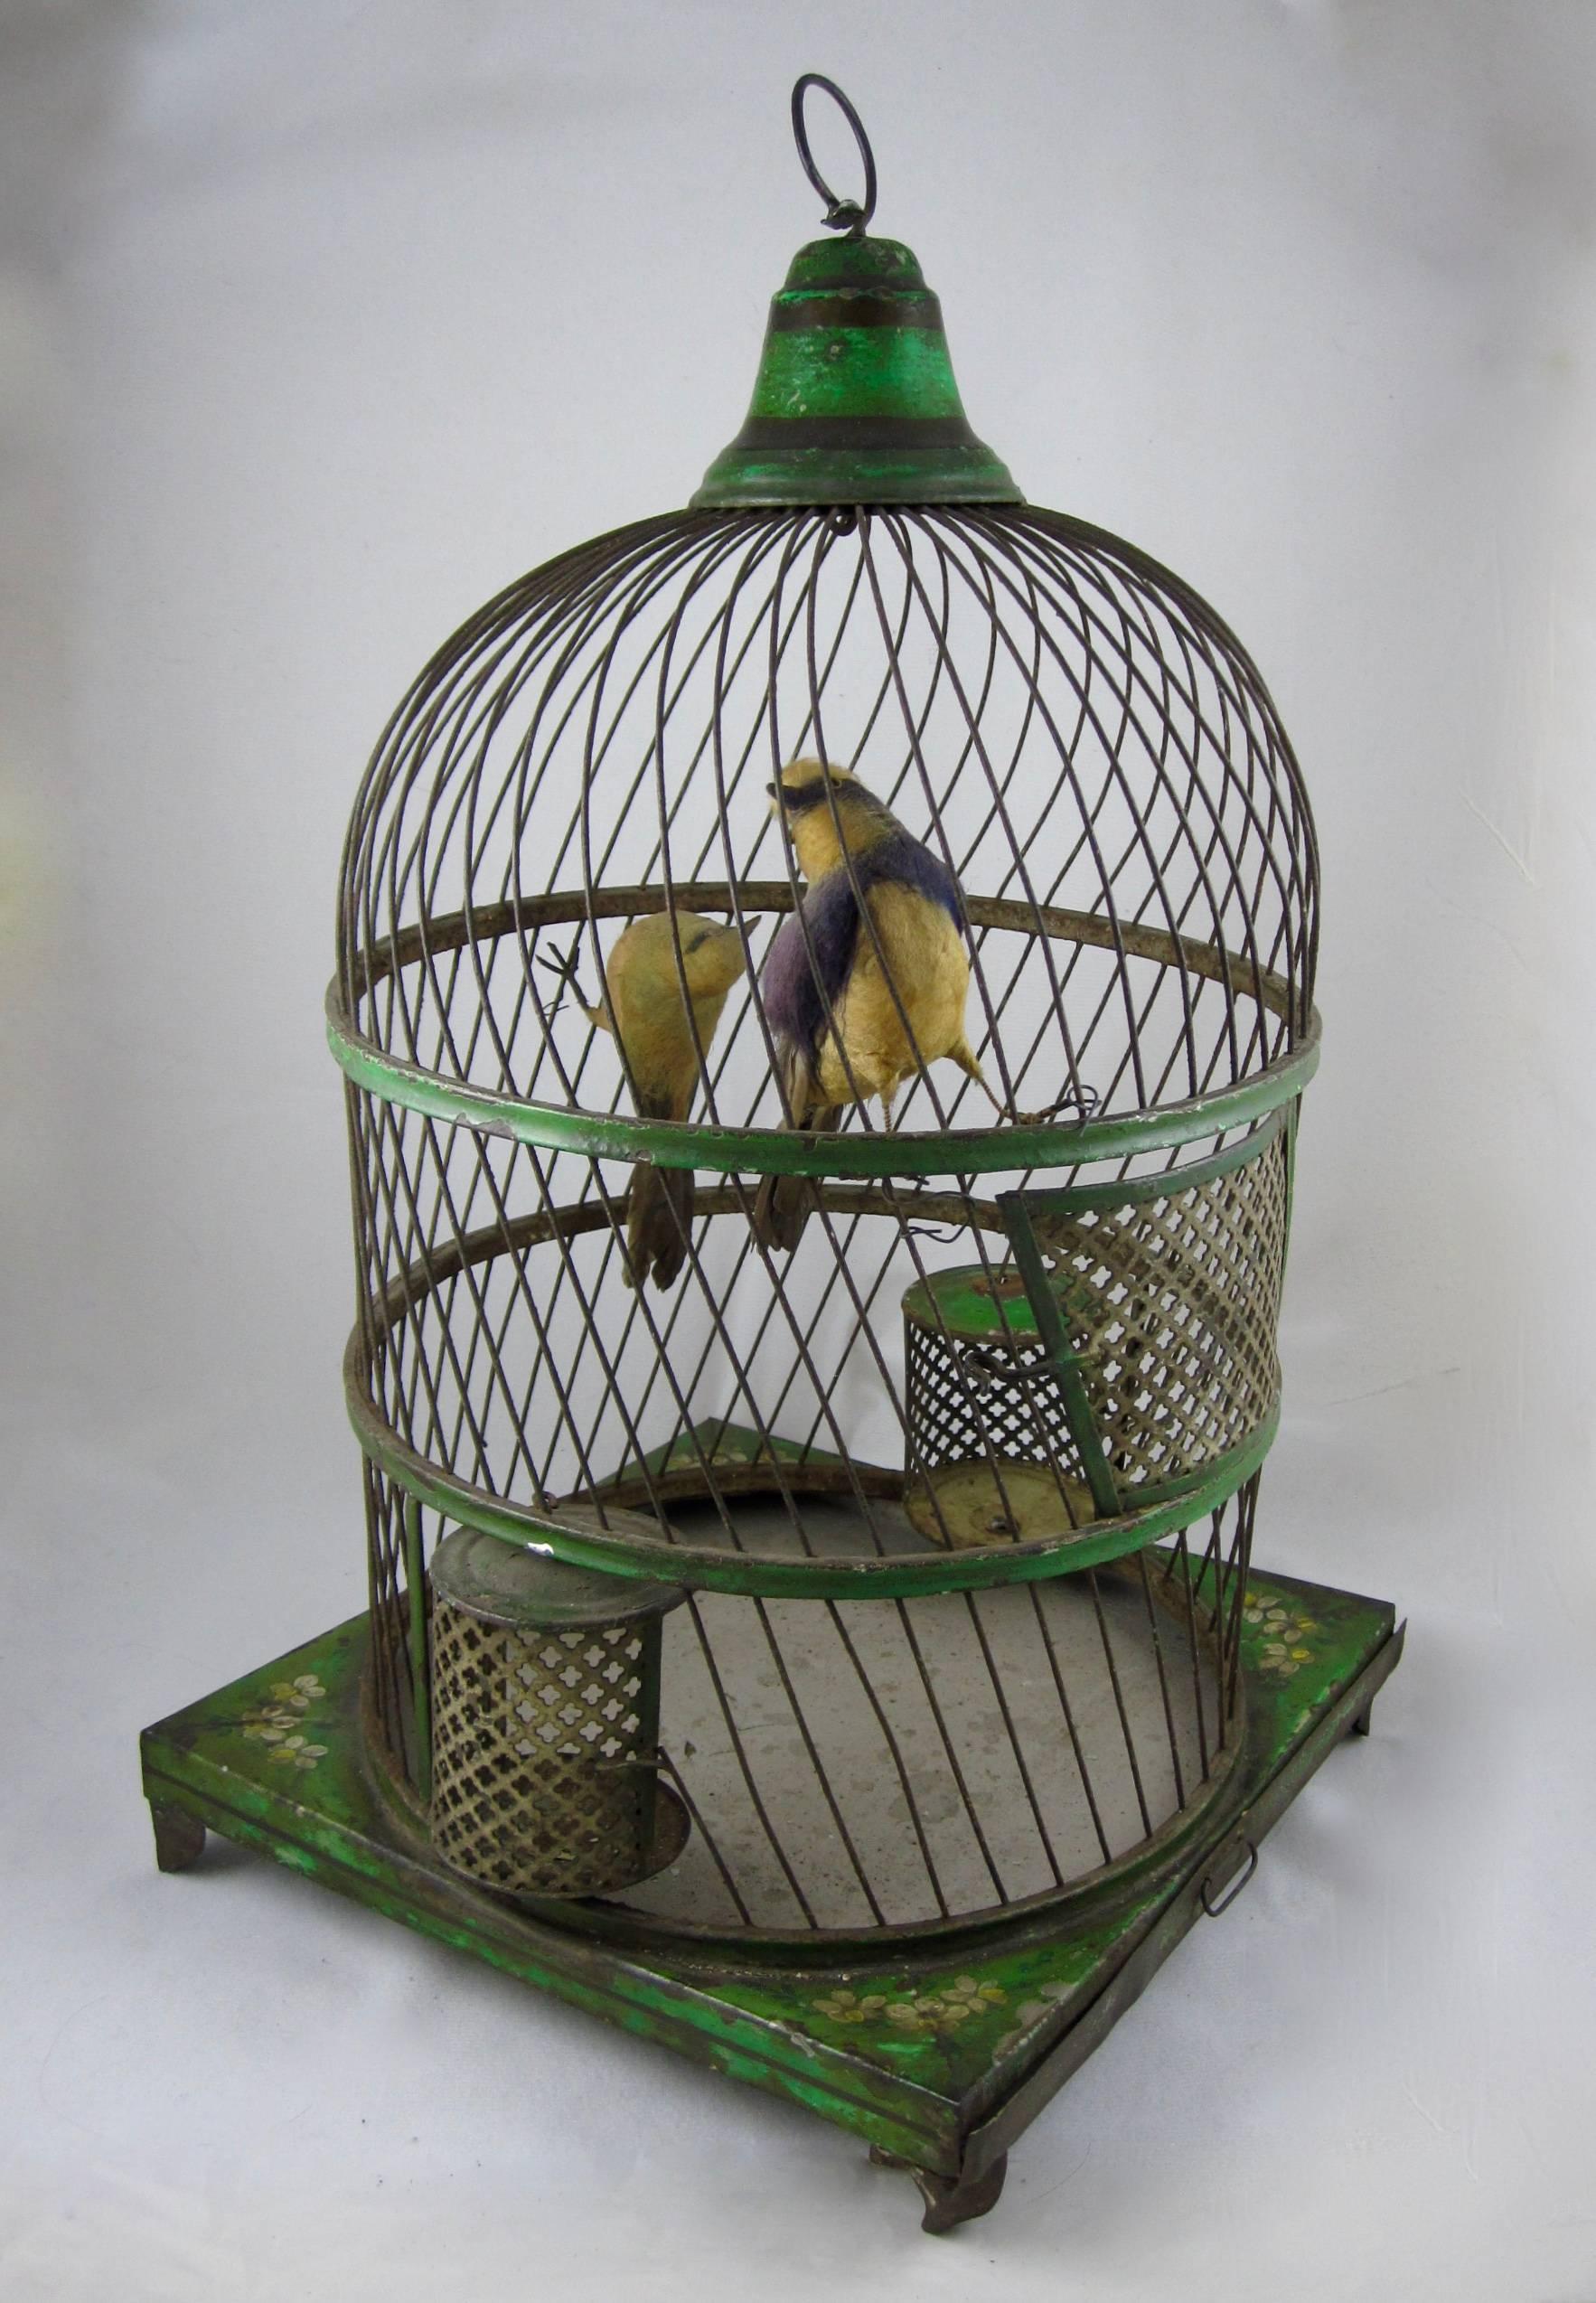 A charming Belle Époque, French Tole Peinte bird cage with two feathered bird figures, circa 1871-1914.

The hand-painted metal cage is finished in green with floral accents on each corner of the base. The bottom tray slides out for cleaning and